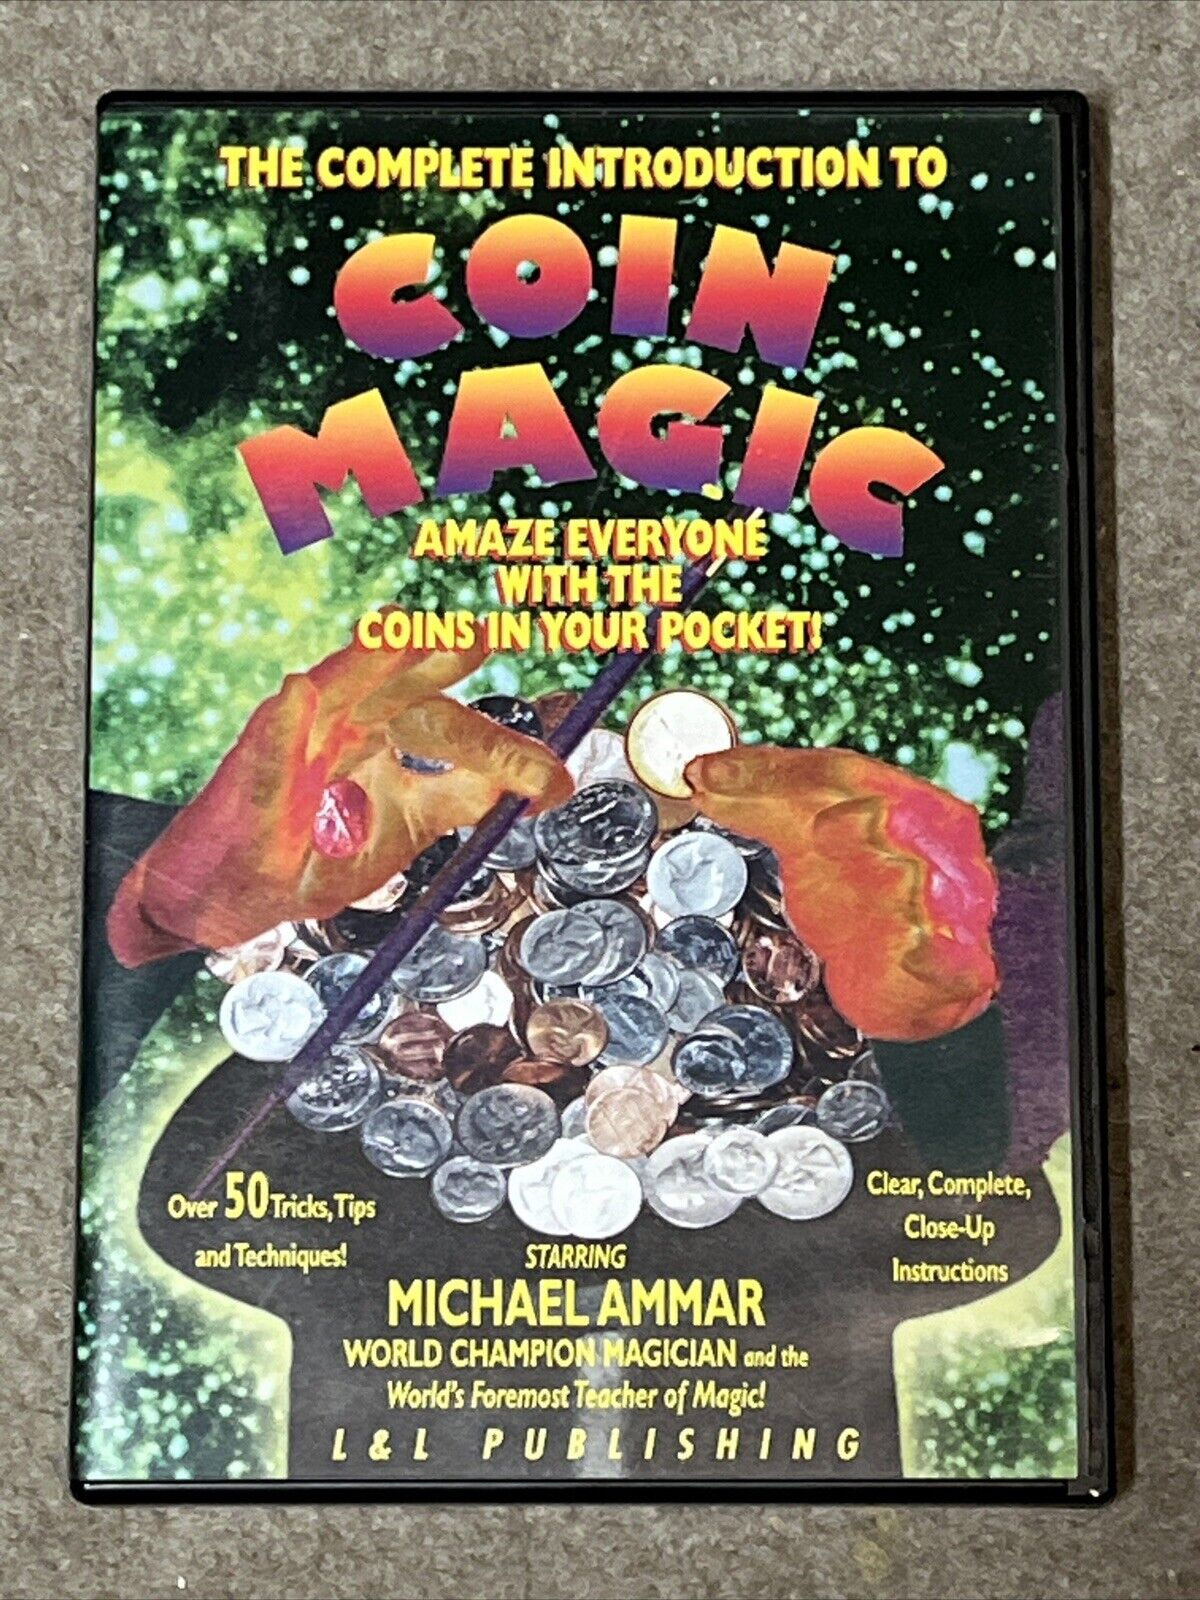 THE COMPLETE INTRODUCTION TO COIN MAGIC by Michael Ammar DVD 